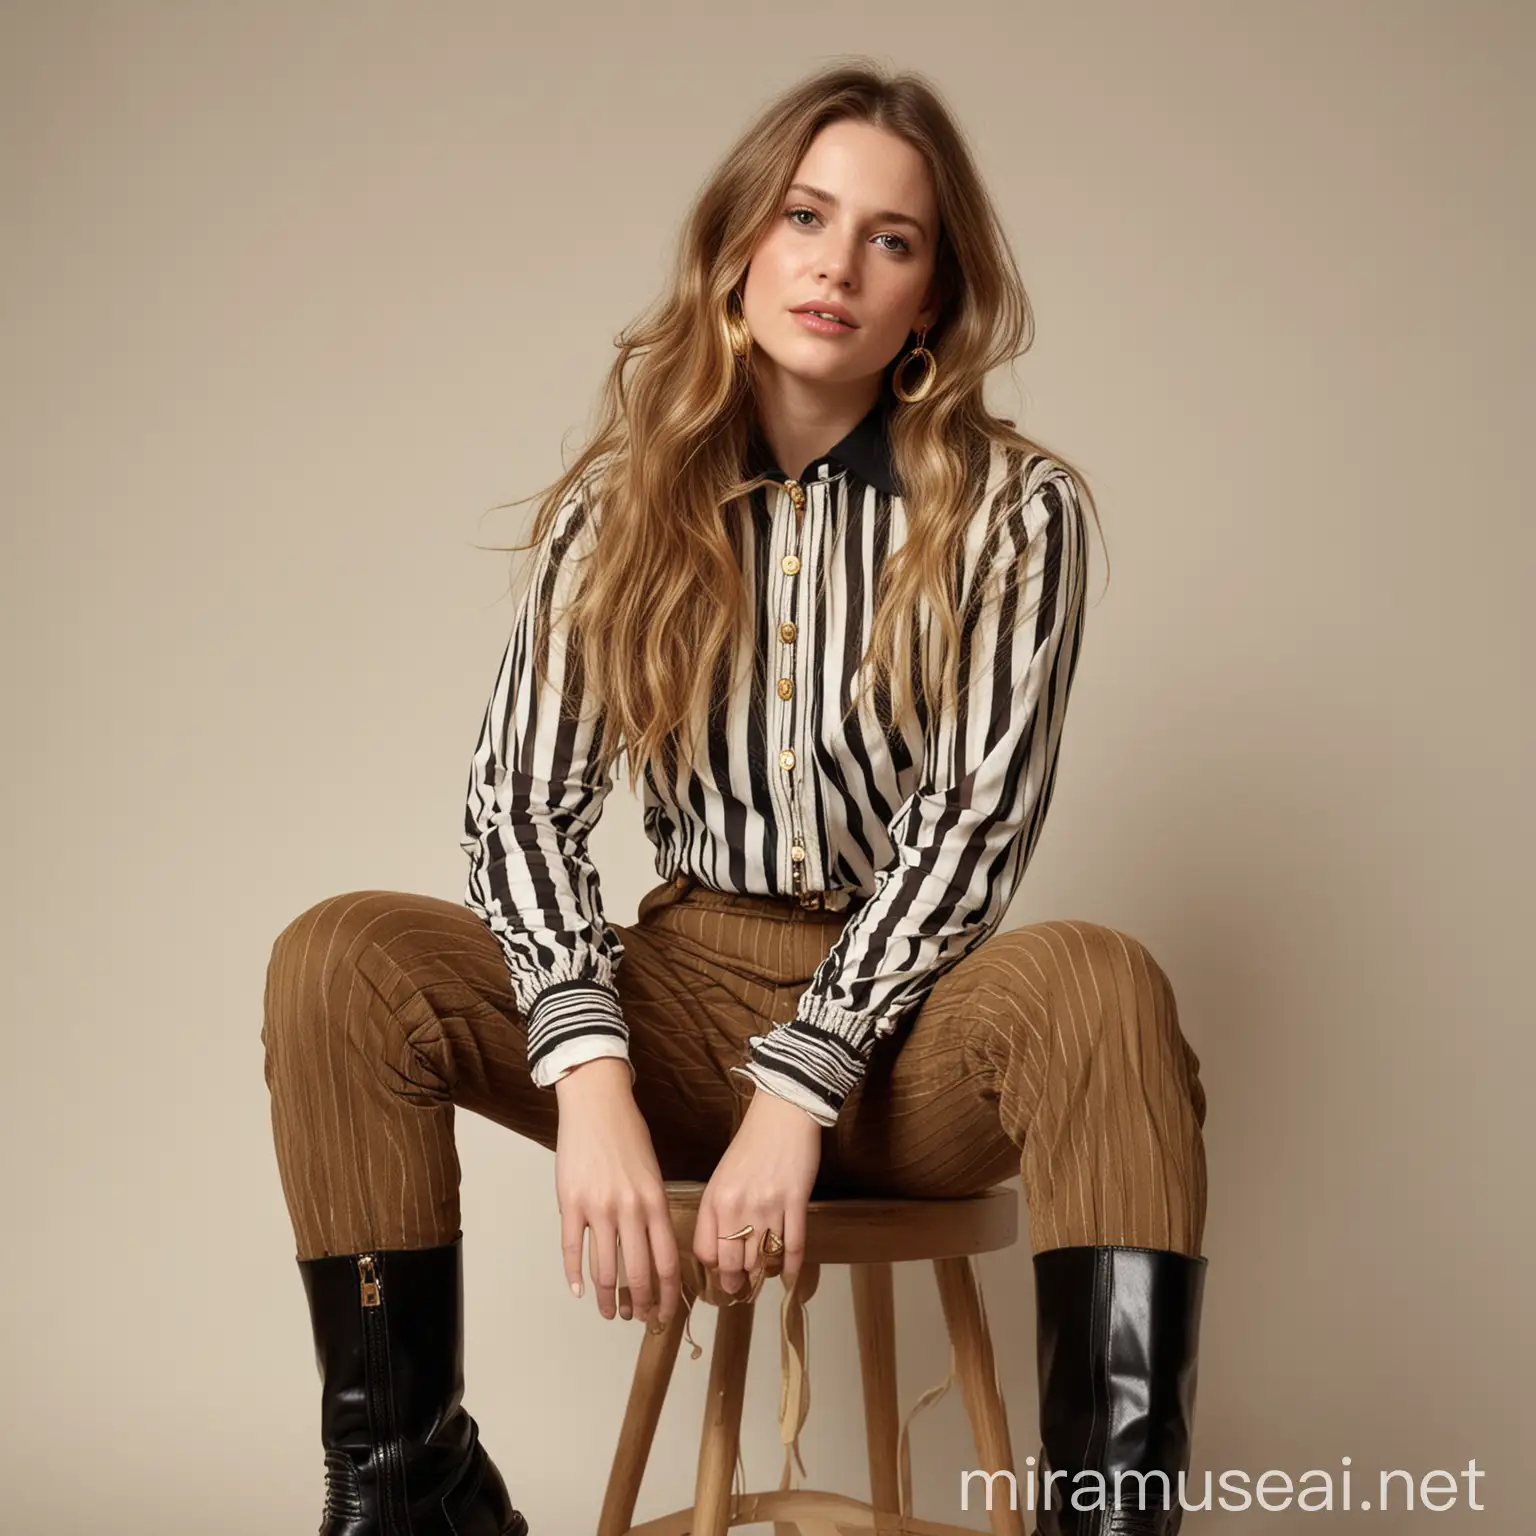 Young Woman in Casual Striped Outfit and Boots